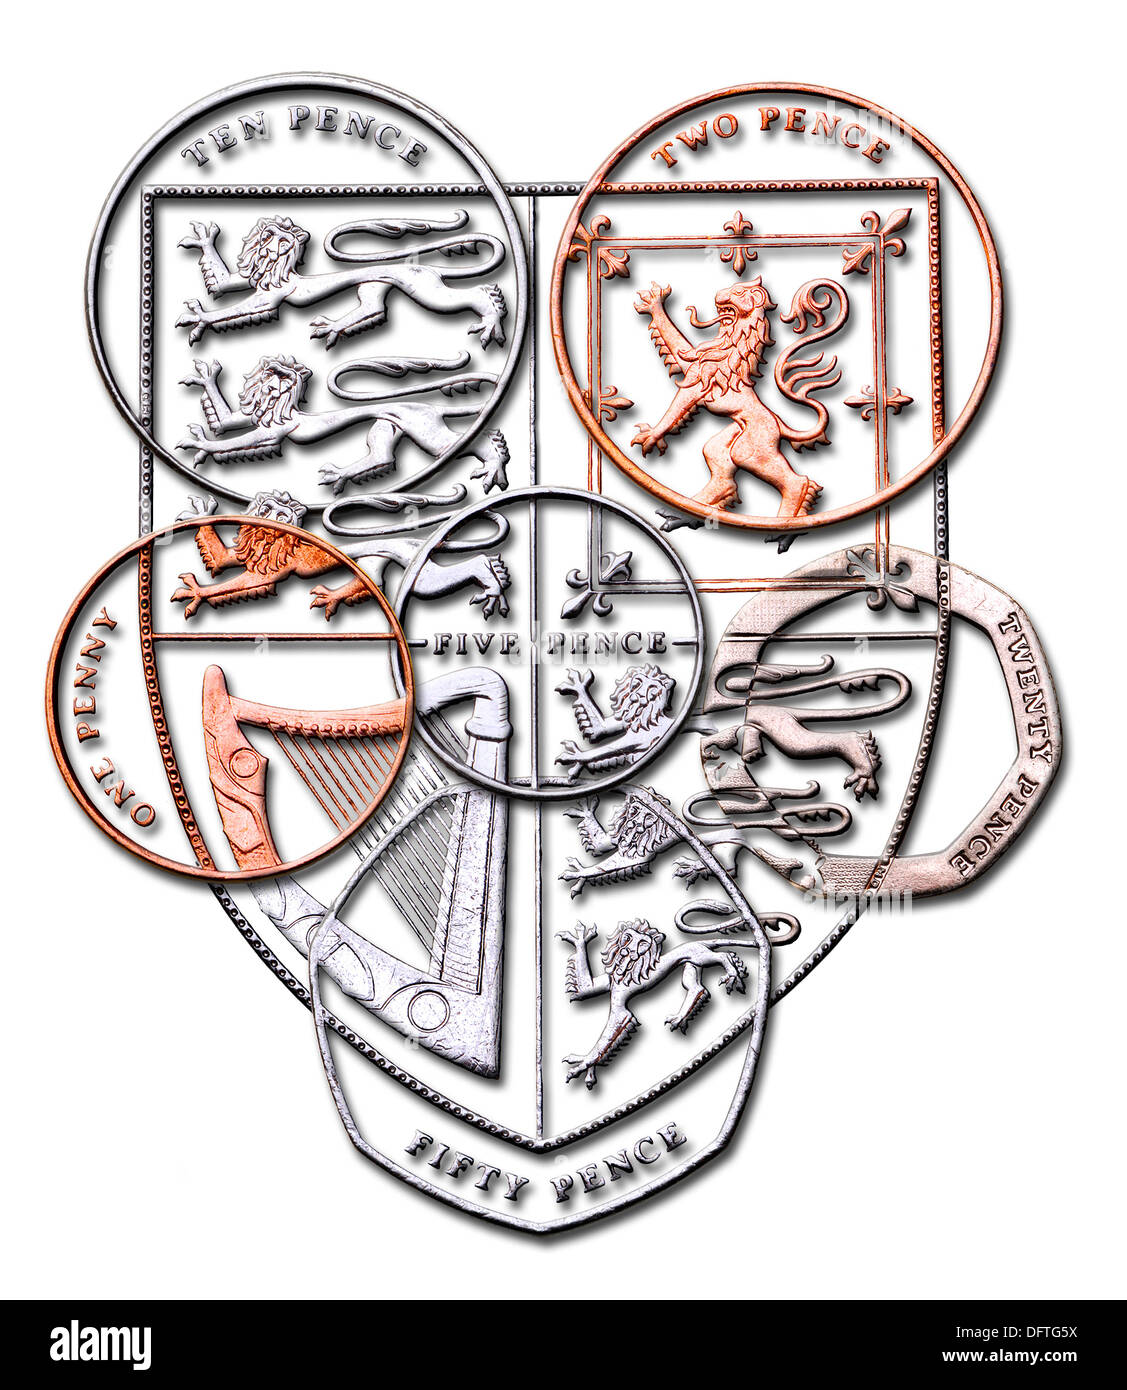 British coinage. All coins, put together to form the shield found on the reverse of the pound coin. Stock Photo